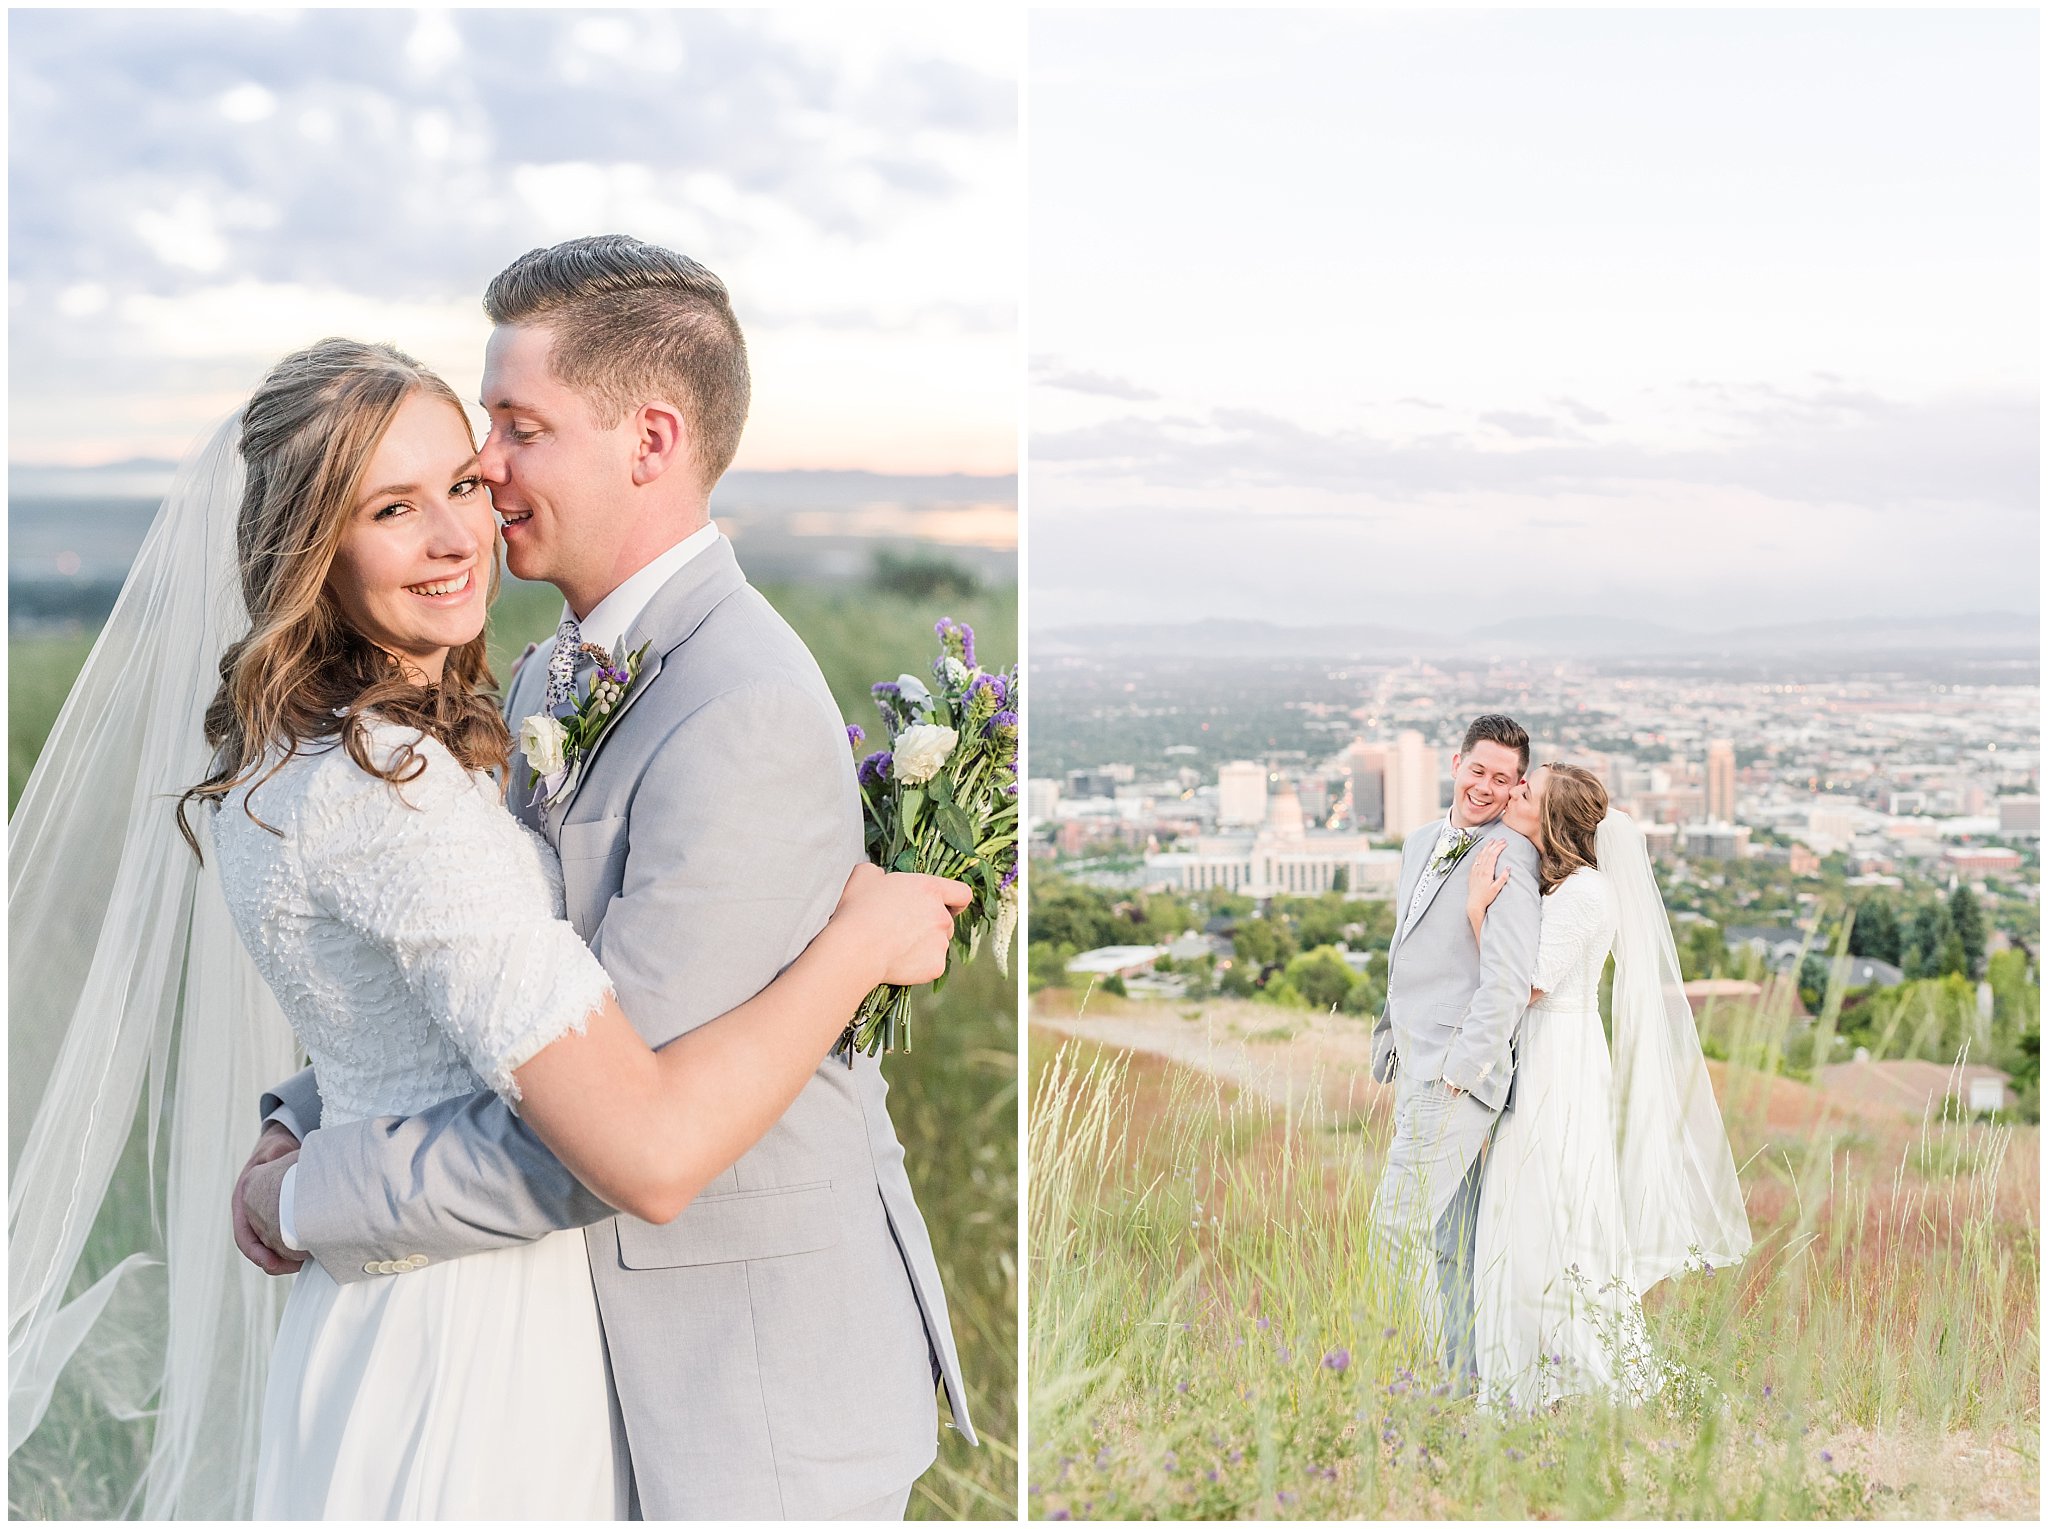 Bride and groom at sunset overlooking Salt Lake City | Wearing elegant, simple dress with veil and grey suit with lavender florals | Elegant formal session at the Salt Lake Temple and Ensign Peak Formal Session | Jessie and Dallin Photography